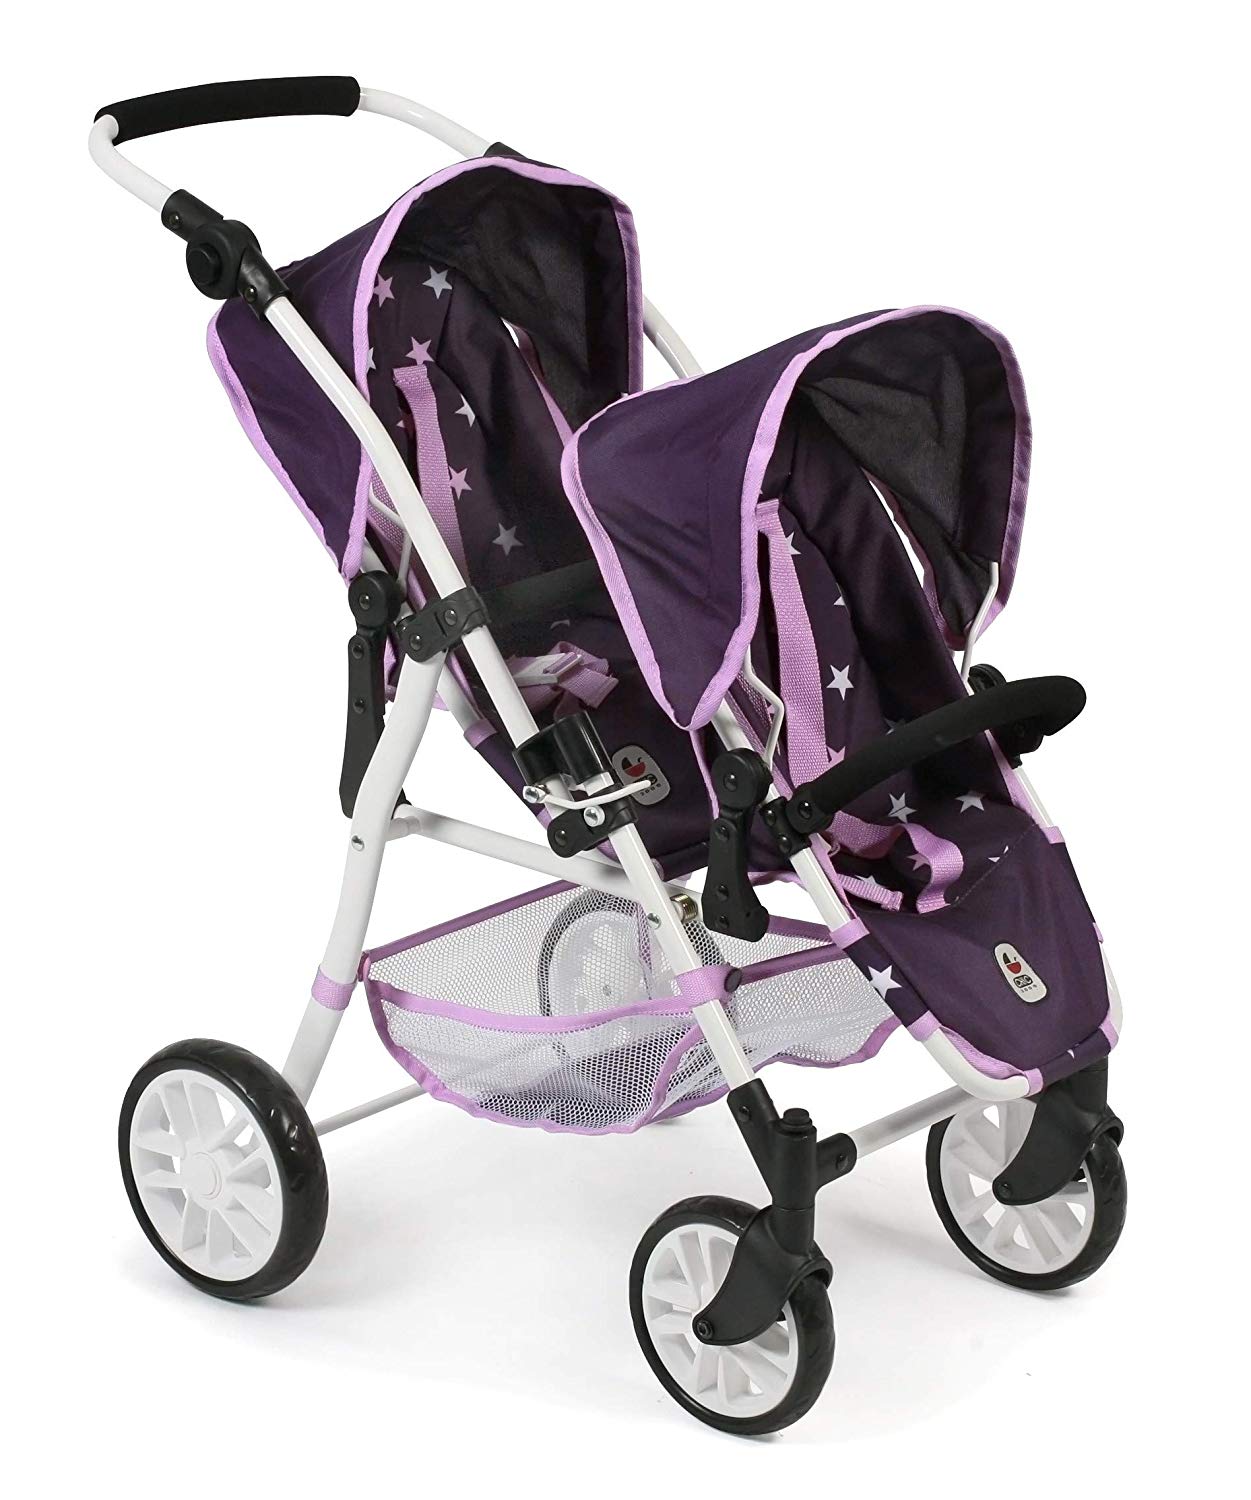 Bayer Chic 2000 691 71 Tandem Buggy Twinny, Twin Doll\'s Pram for Dolls up to 50 cm, Stars Purple